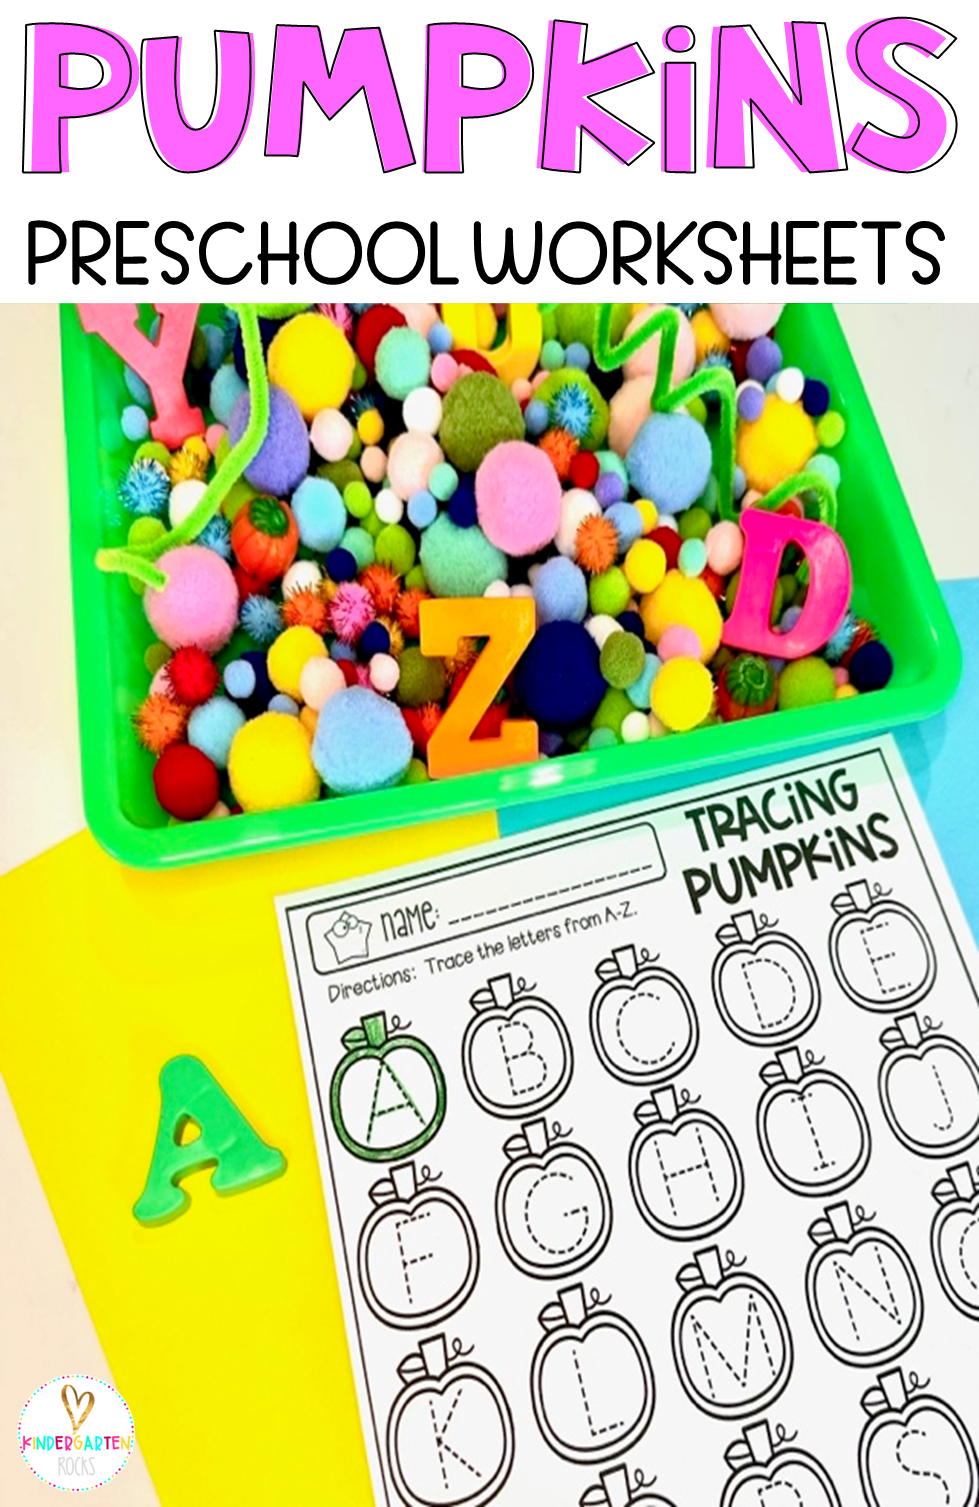 Pumpkin Math and Literacy Worksheets and Printables for Preschool is perfect for your preschool classroom. The boys and girls will choose a magnetic letter and then trace the number the matching color and color the pumpkin to match.